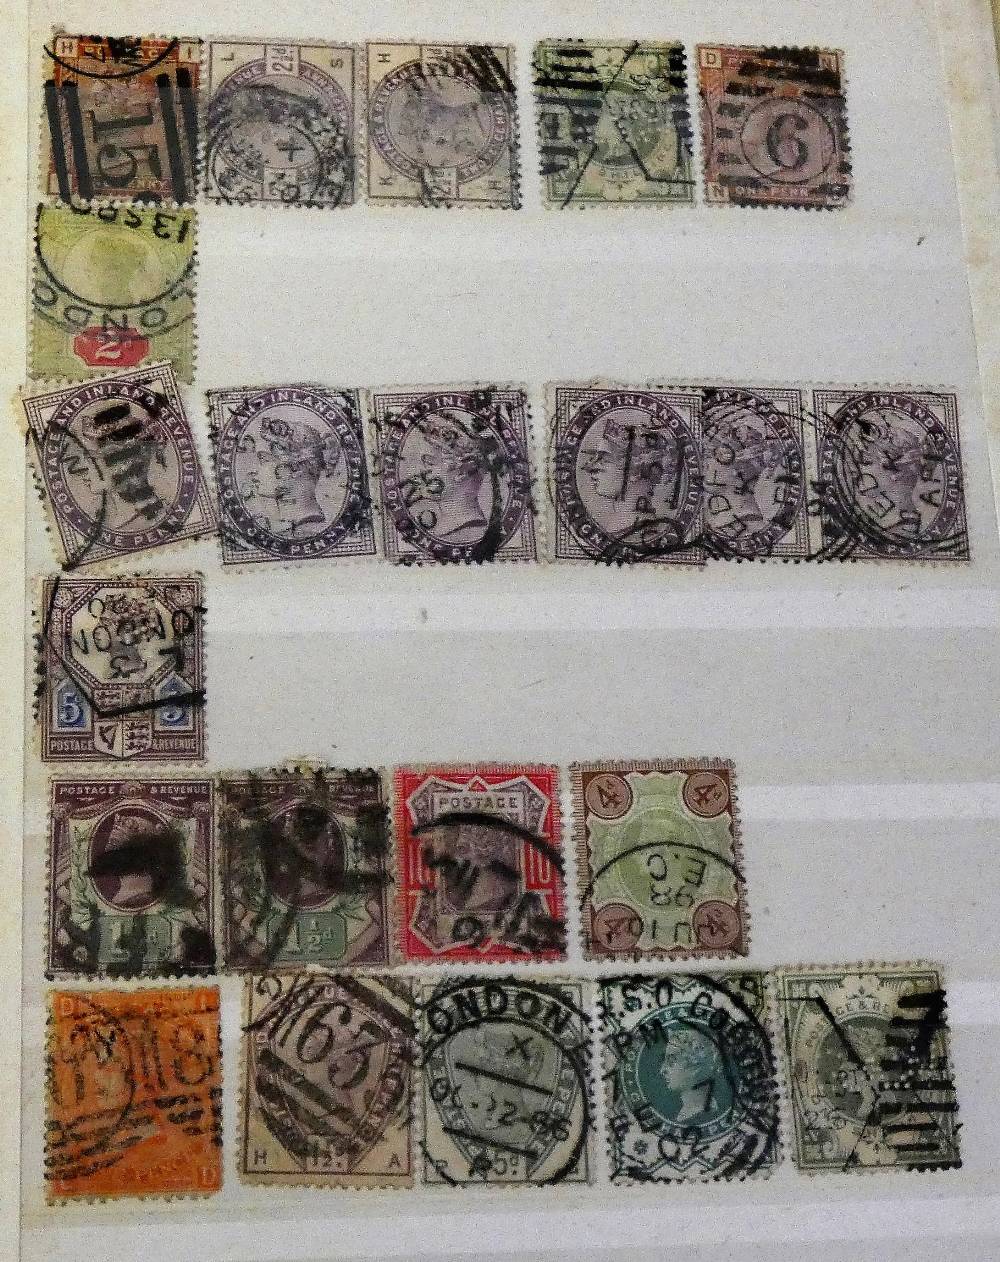 An 'Abria' Great Britain stamp album, to include a penny black. - Image 2 of 6